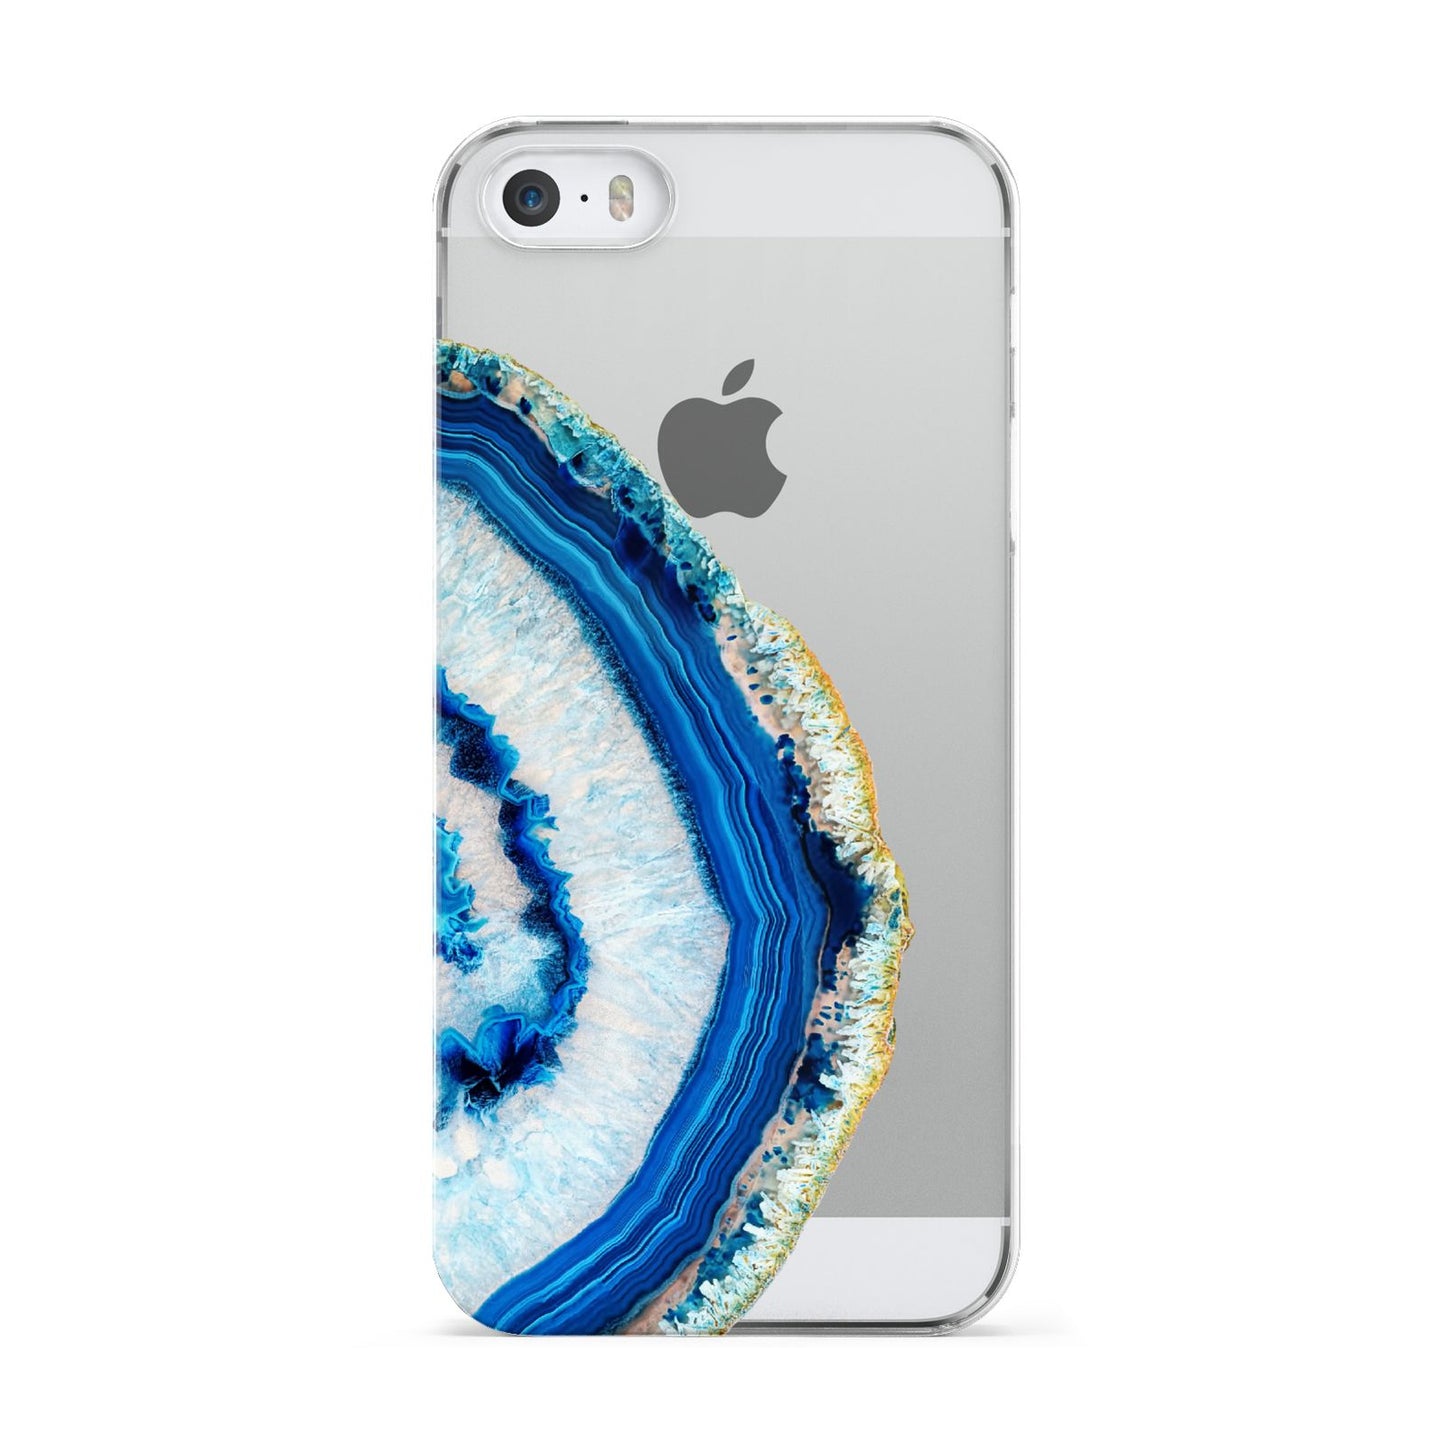 Agate Dark Blue and Turquoise Apple iPhone 5 Case